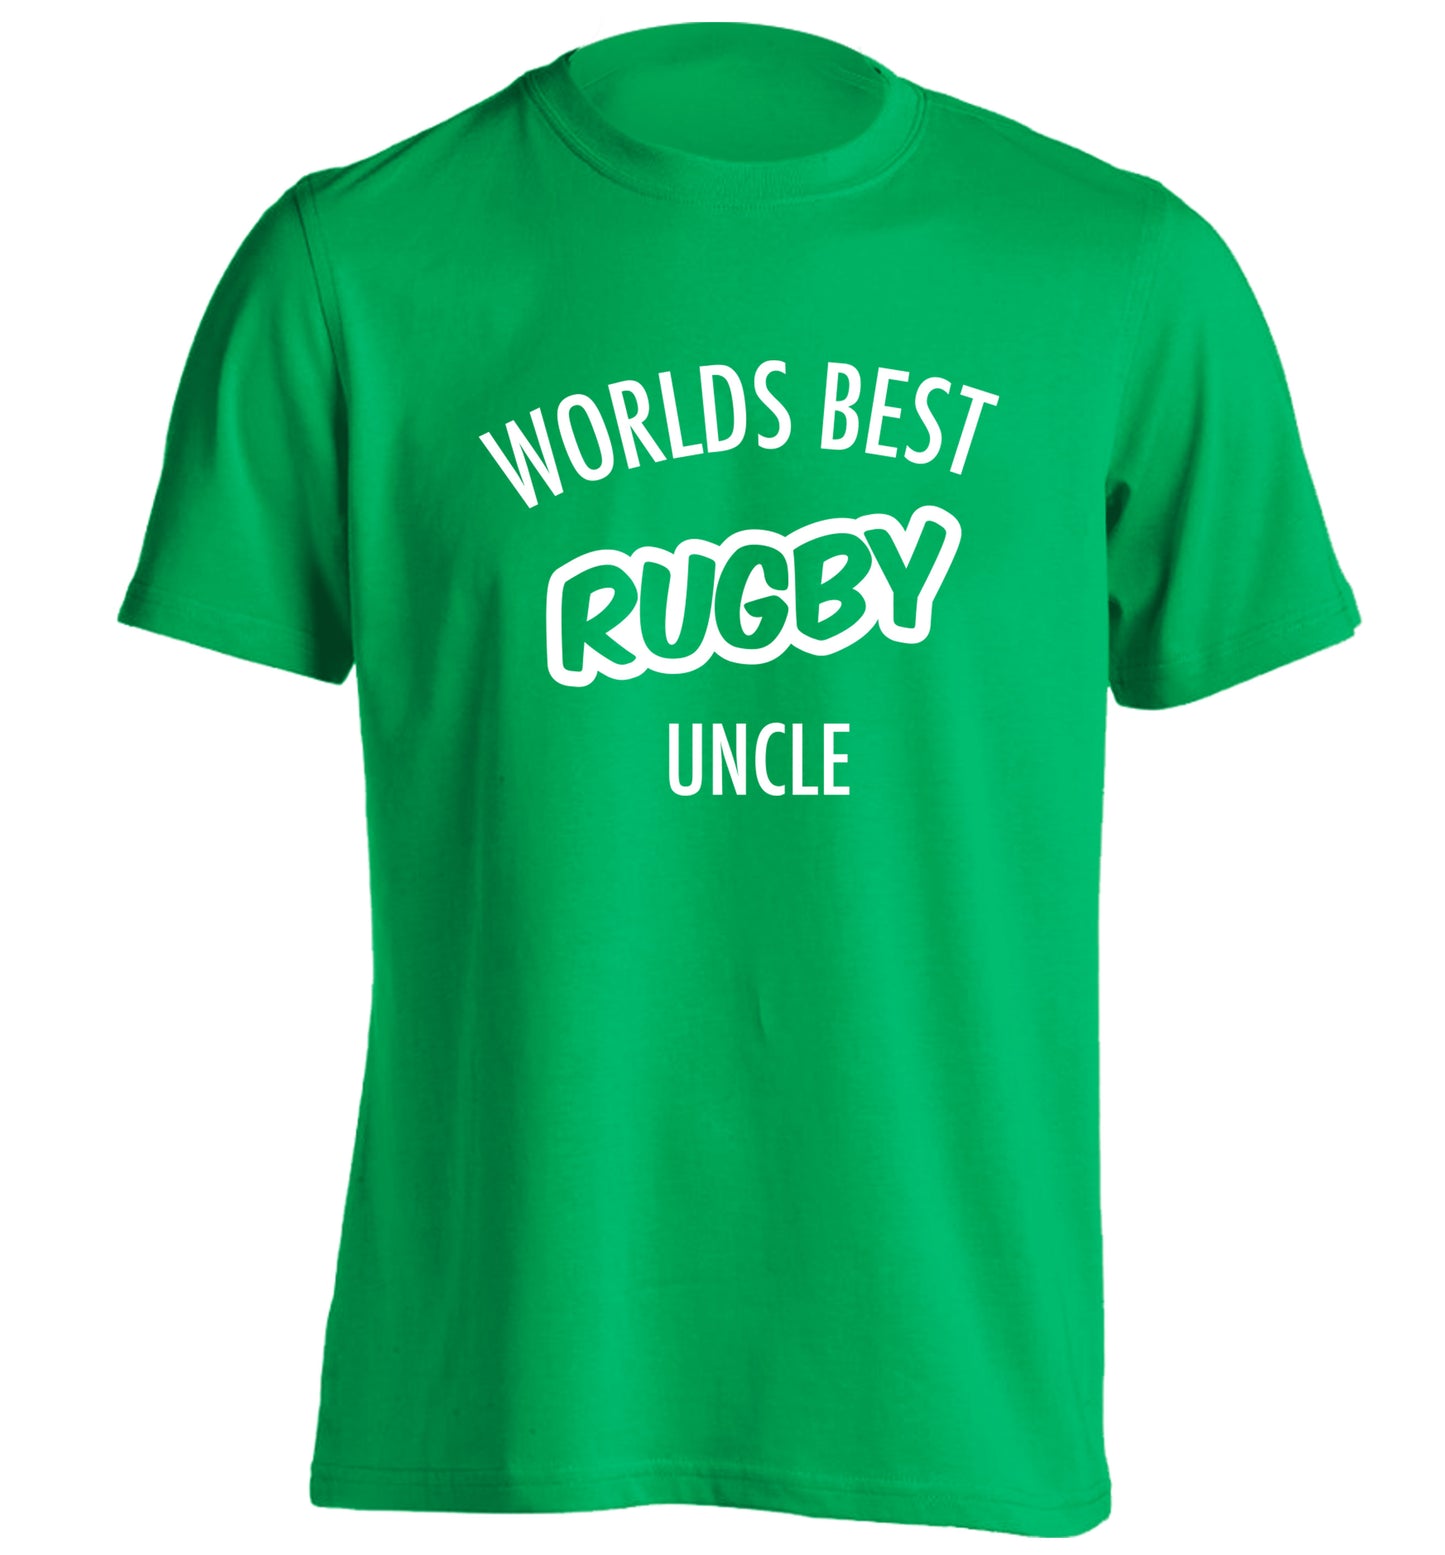 Worlds best rugby uncle adults unisex green Tshirt 2XL